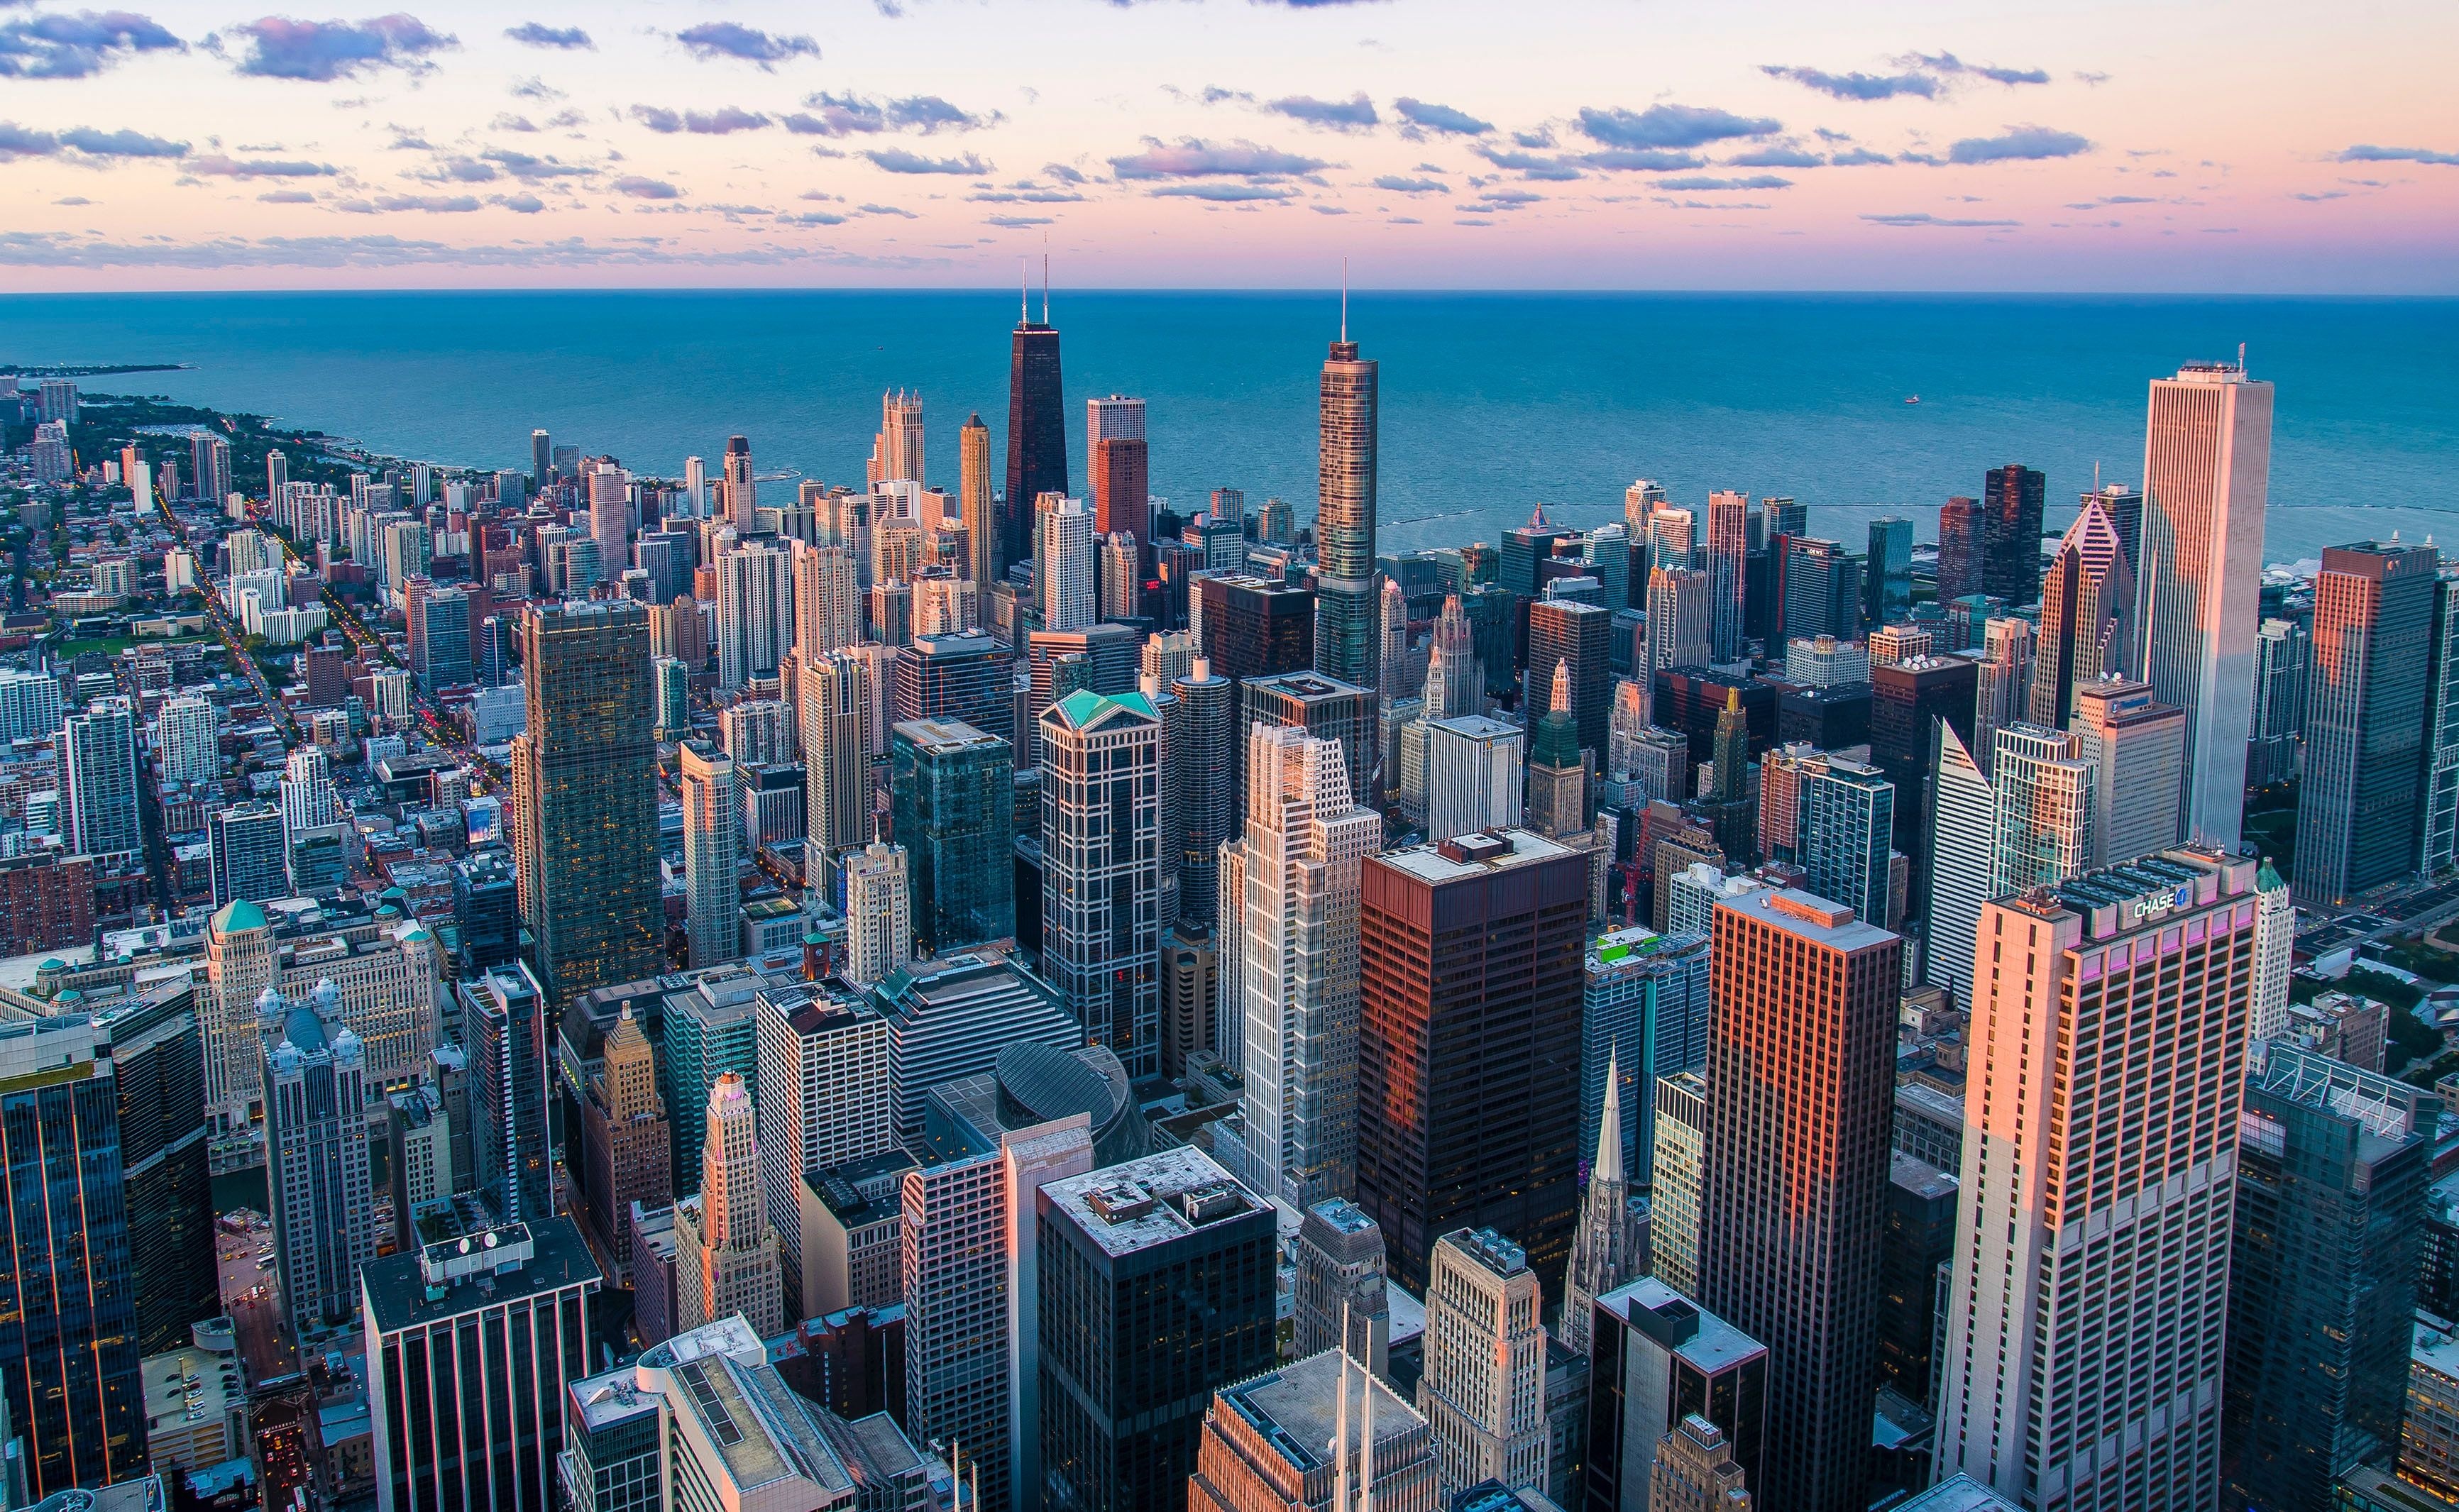 Chicago: Landmarks in the city include Millennium Park, Navy Pier, and the Magnificent Mile. 3470x2140 HD Background.